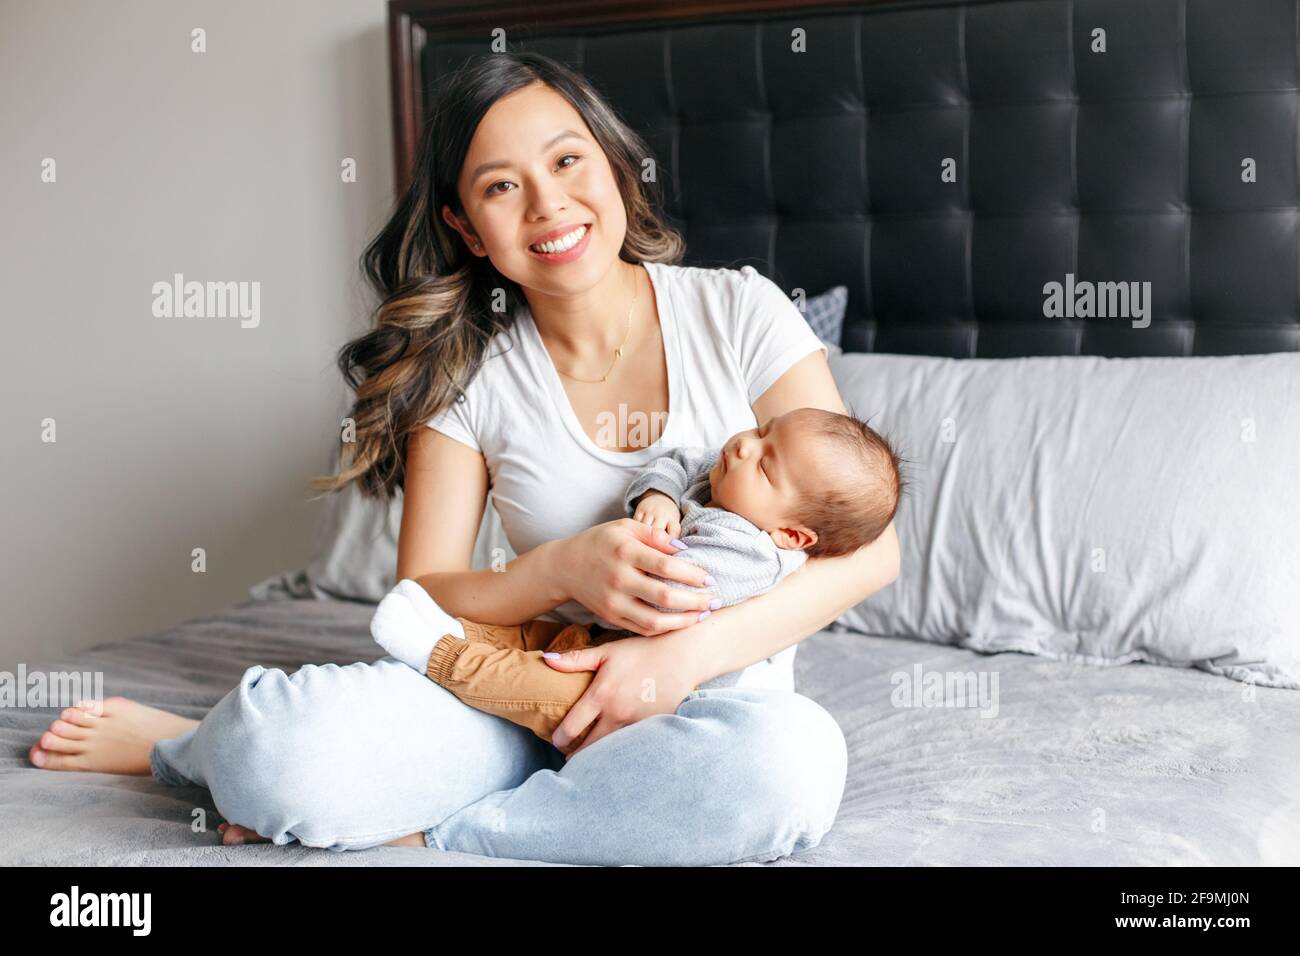 Mothers day holiday. Smiling Chinese Asian mother with newborn baby. Stock Photo